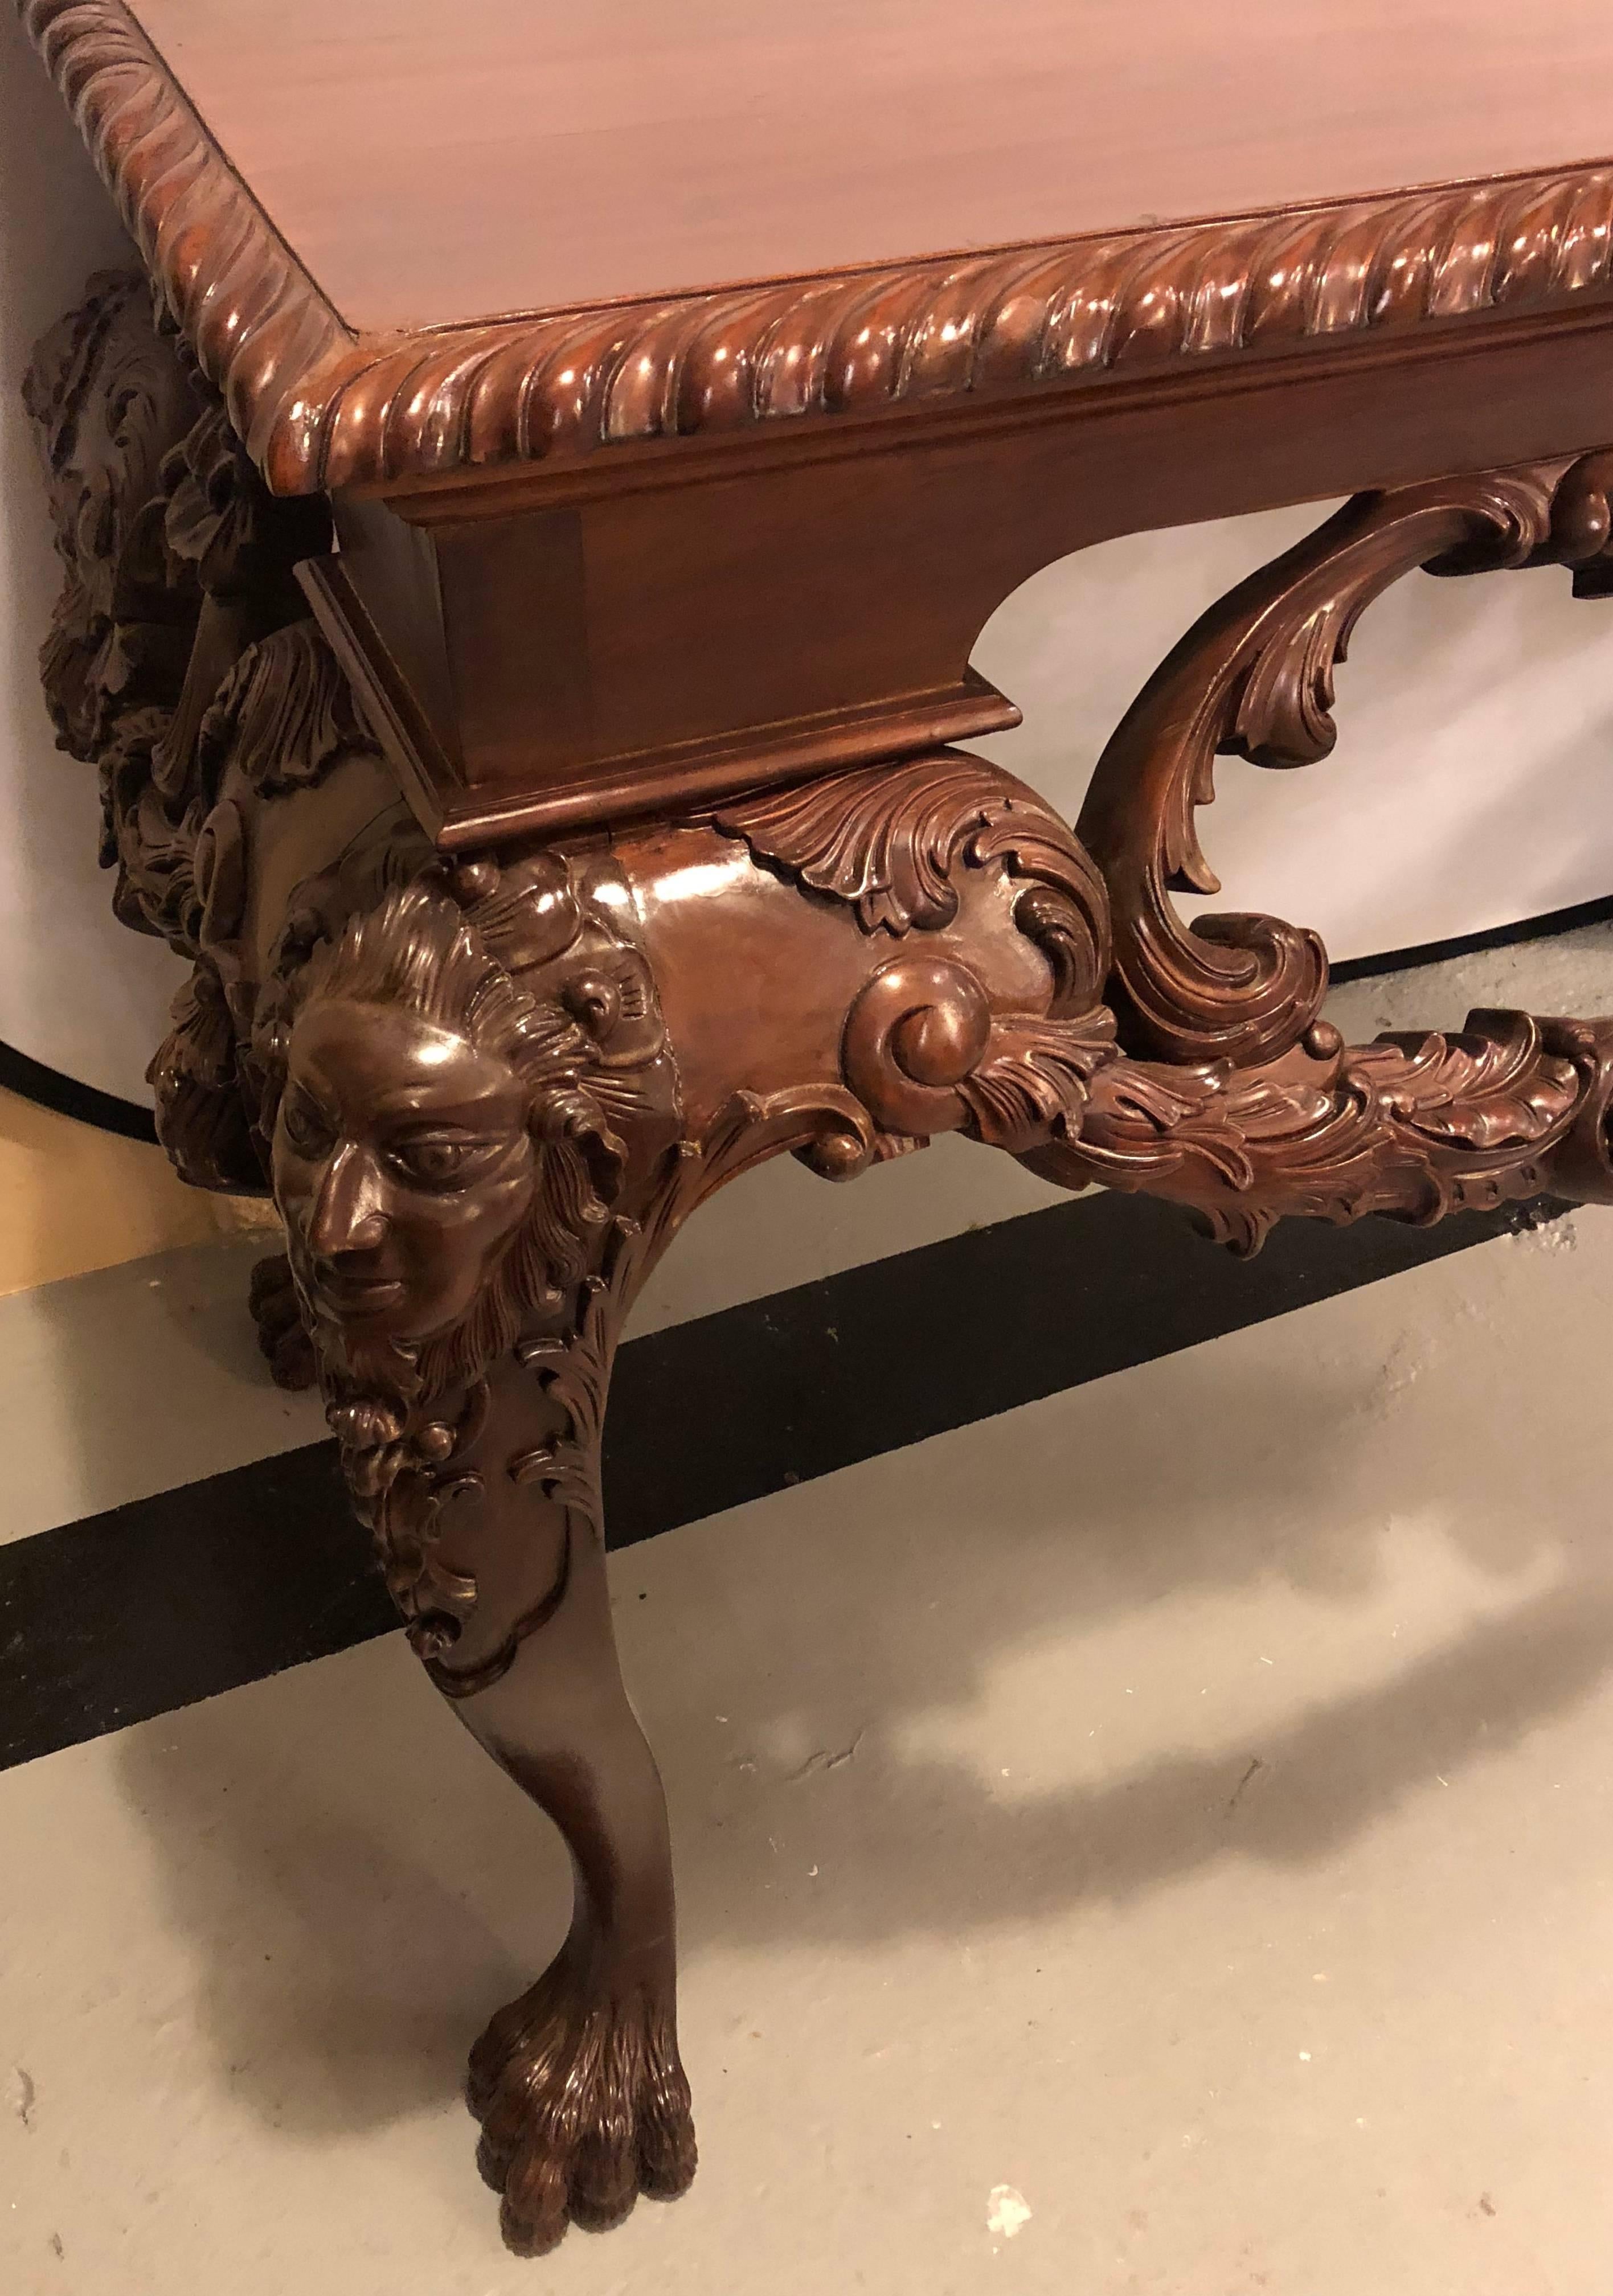 Mahogany Custom Carved Console Table with Claw Feet and Carved Heads, circa 1940s